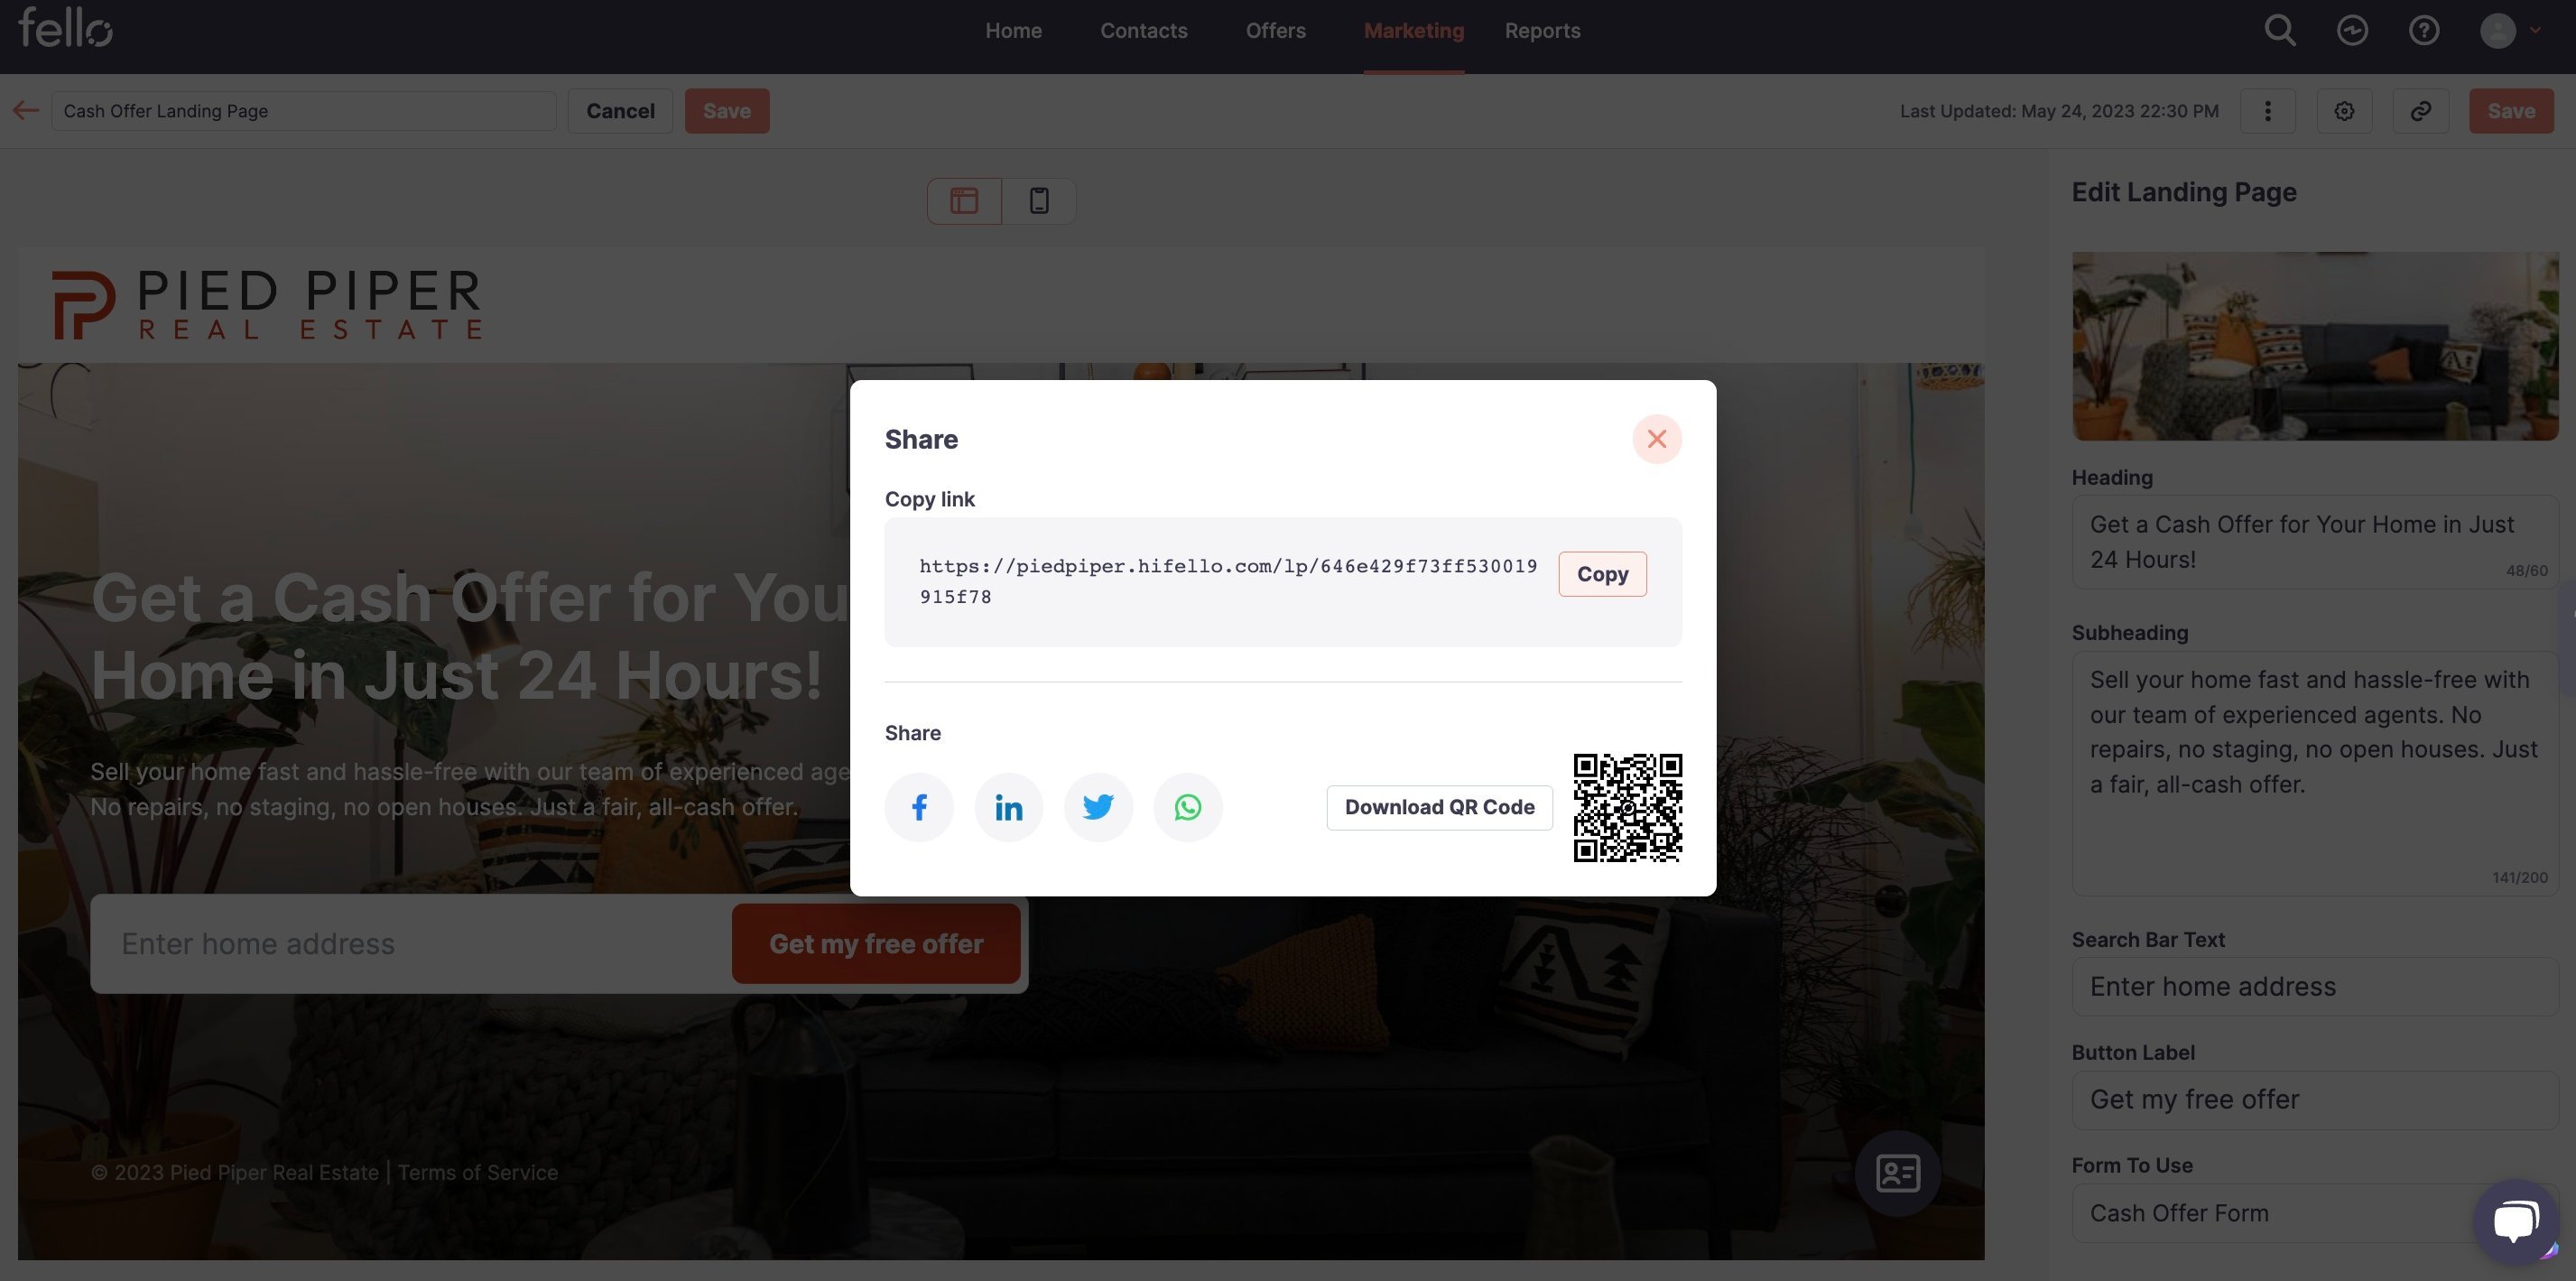 Share pop-up with URL and QR code of the Landing Page